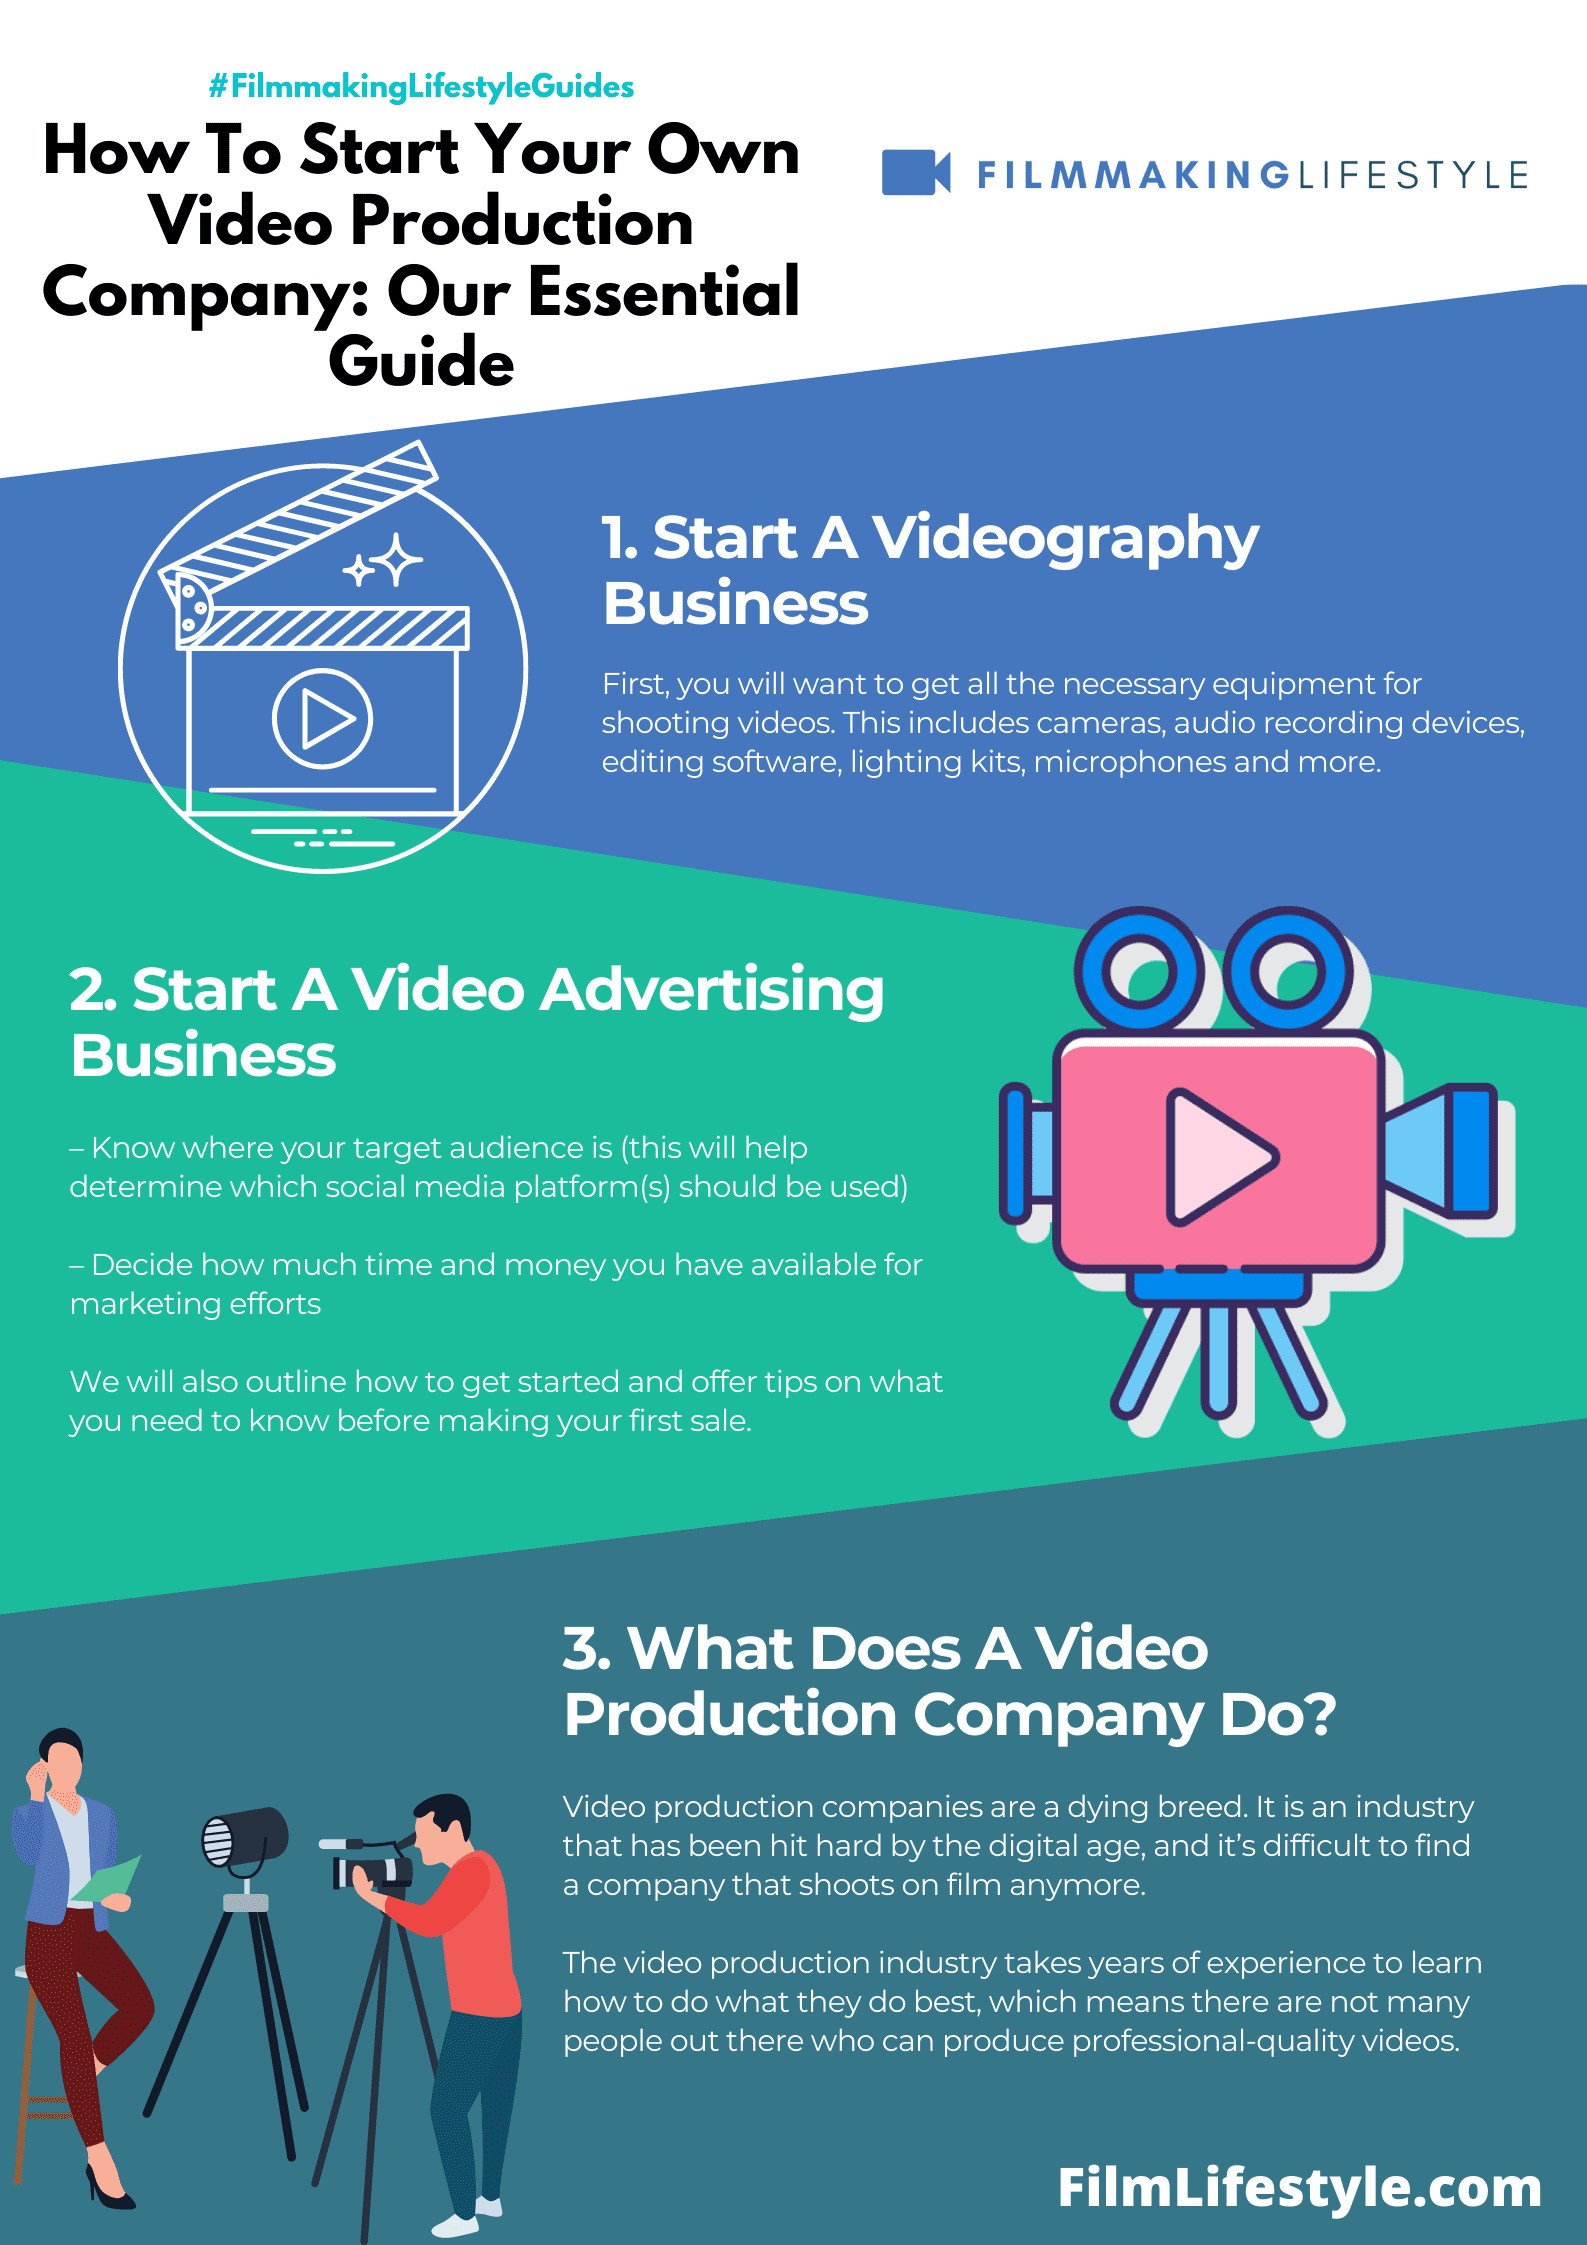 How To Start Your Own Video Production Company